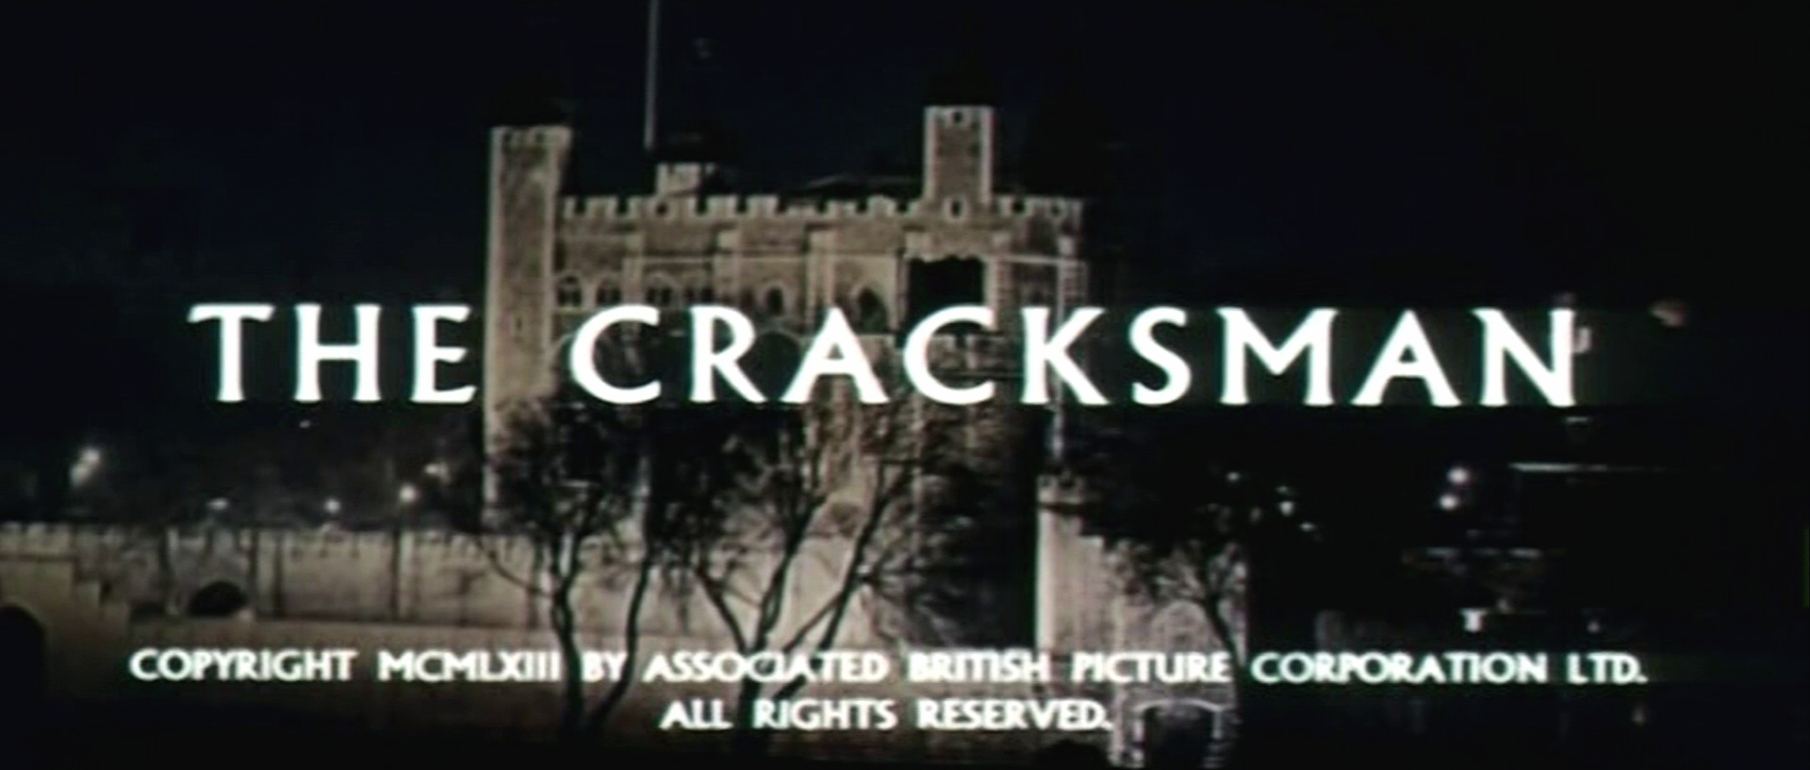 Main title from The Cracksman (1963) (5)  Copyright 1963 Associated British Film Picture Corporation Ltd  All rights reserved